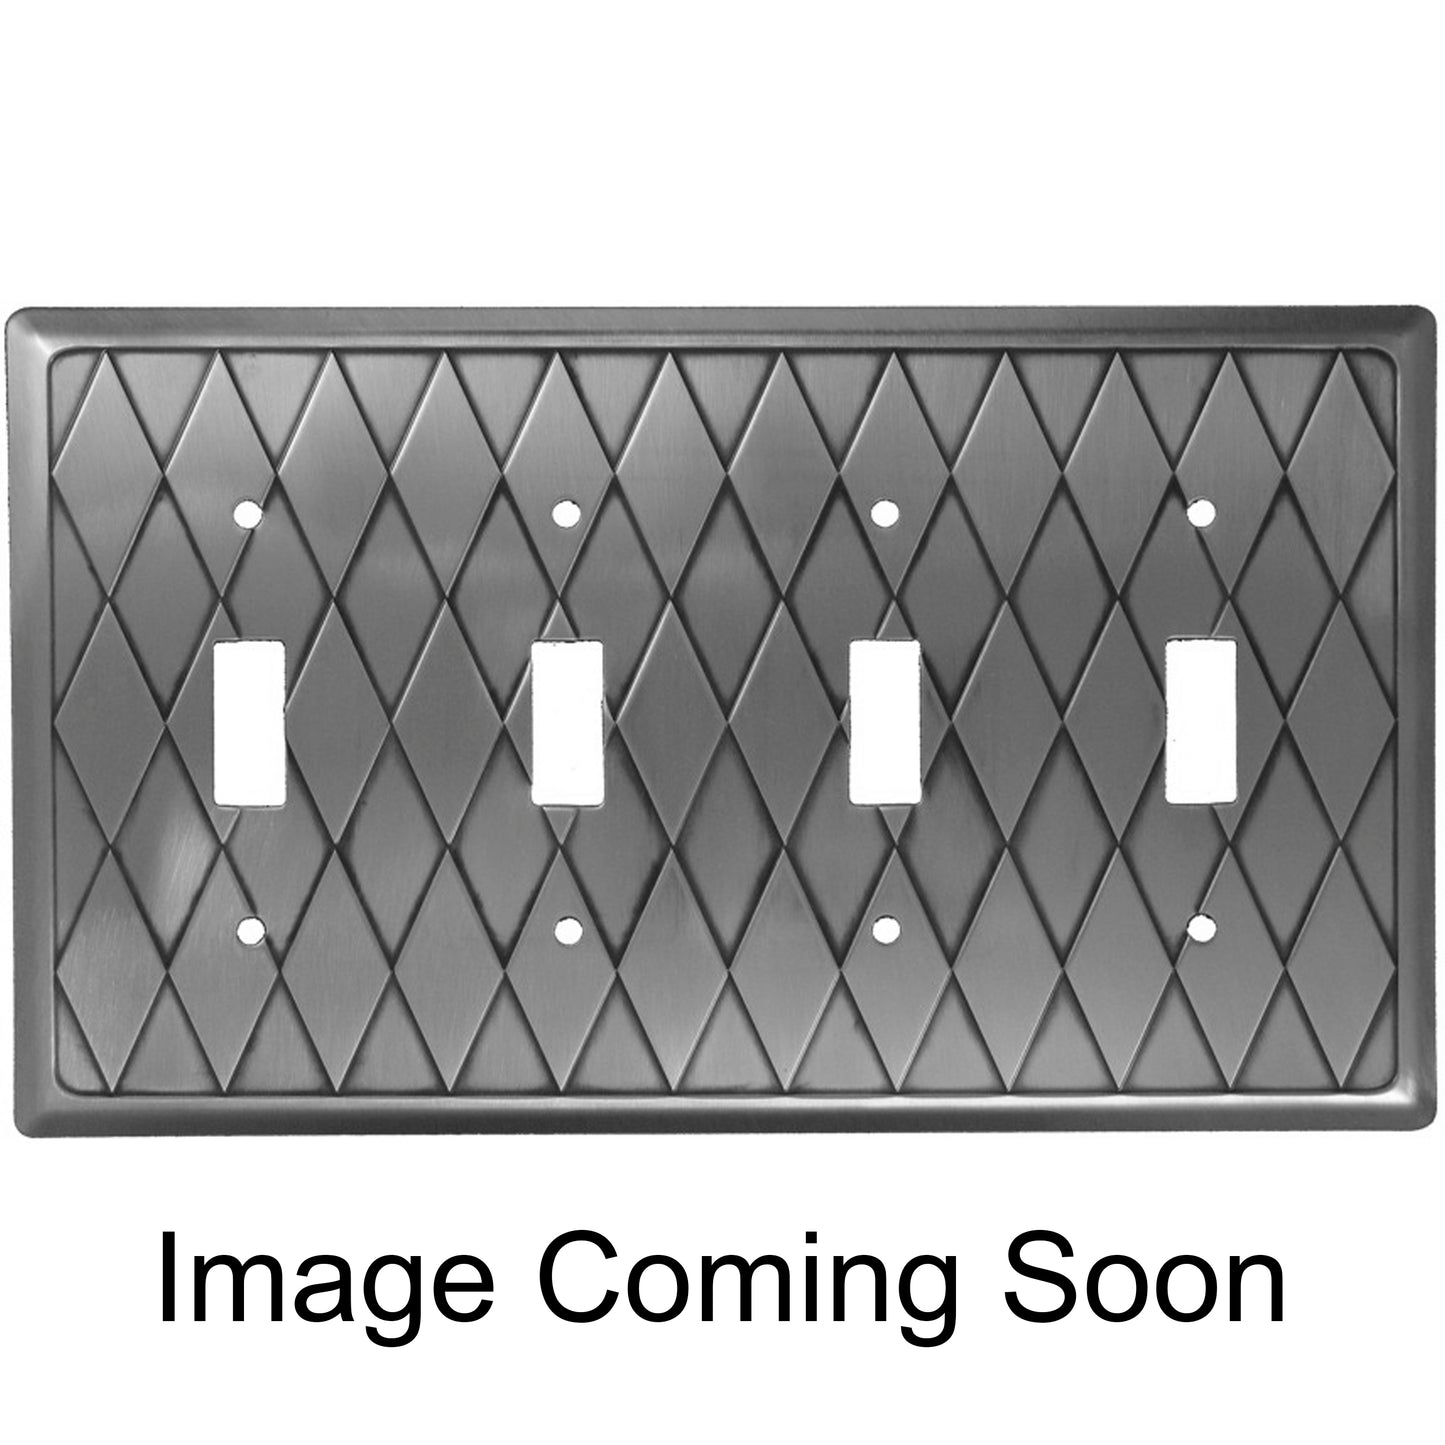 Diamond Stainless Steel 4 Toggle Switchplate